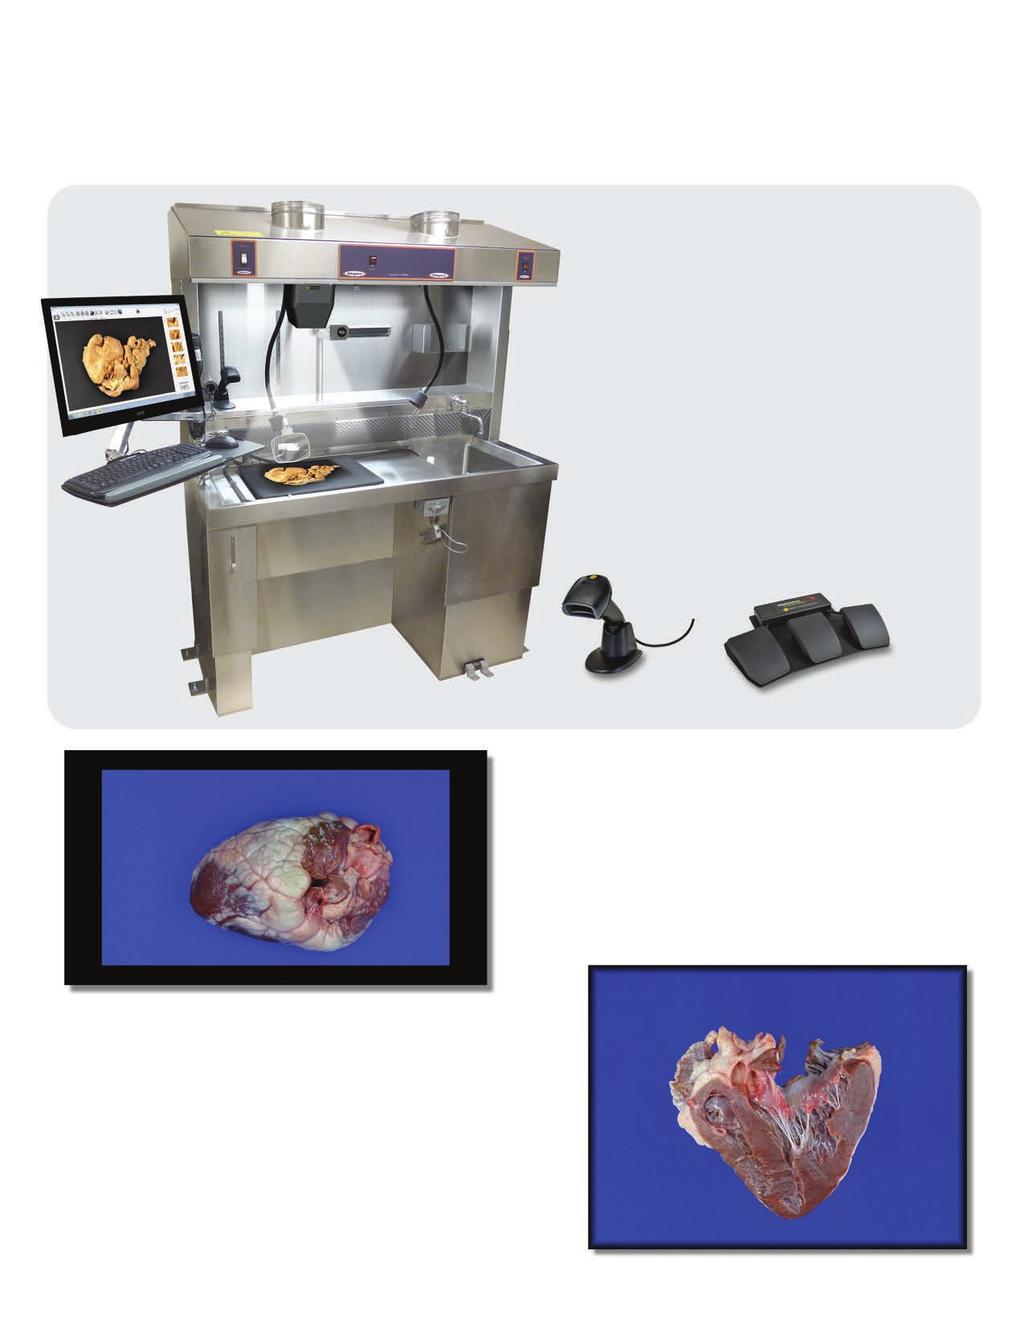 PathStation TM Fits Your Lab PathStation hood Compact In-hood Imaging system. Supports in-process documentation PathStation Key Features 20 MP Image Capture Great HD Video 8.